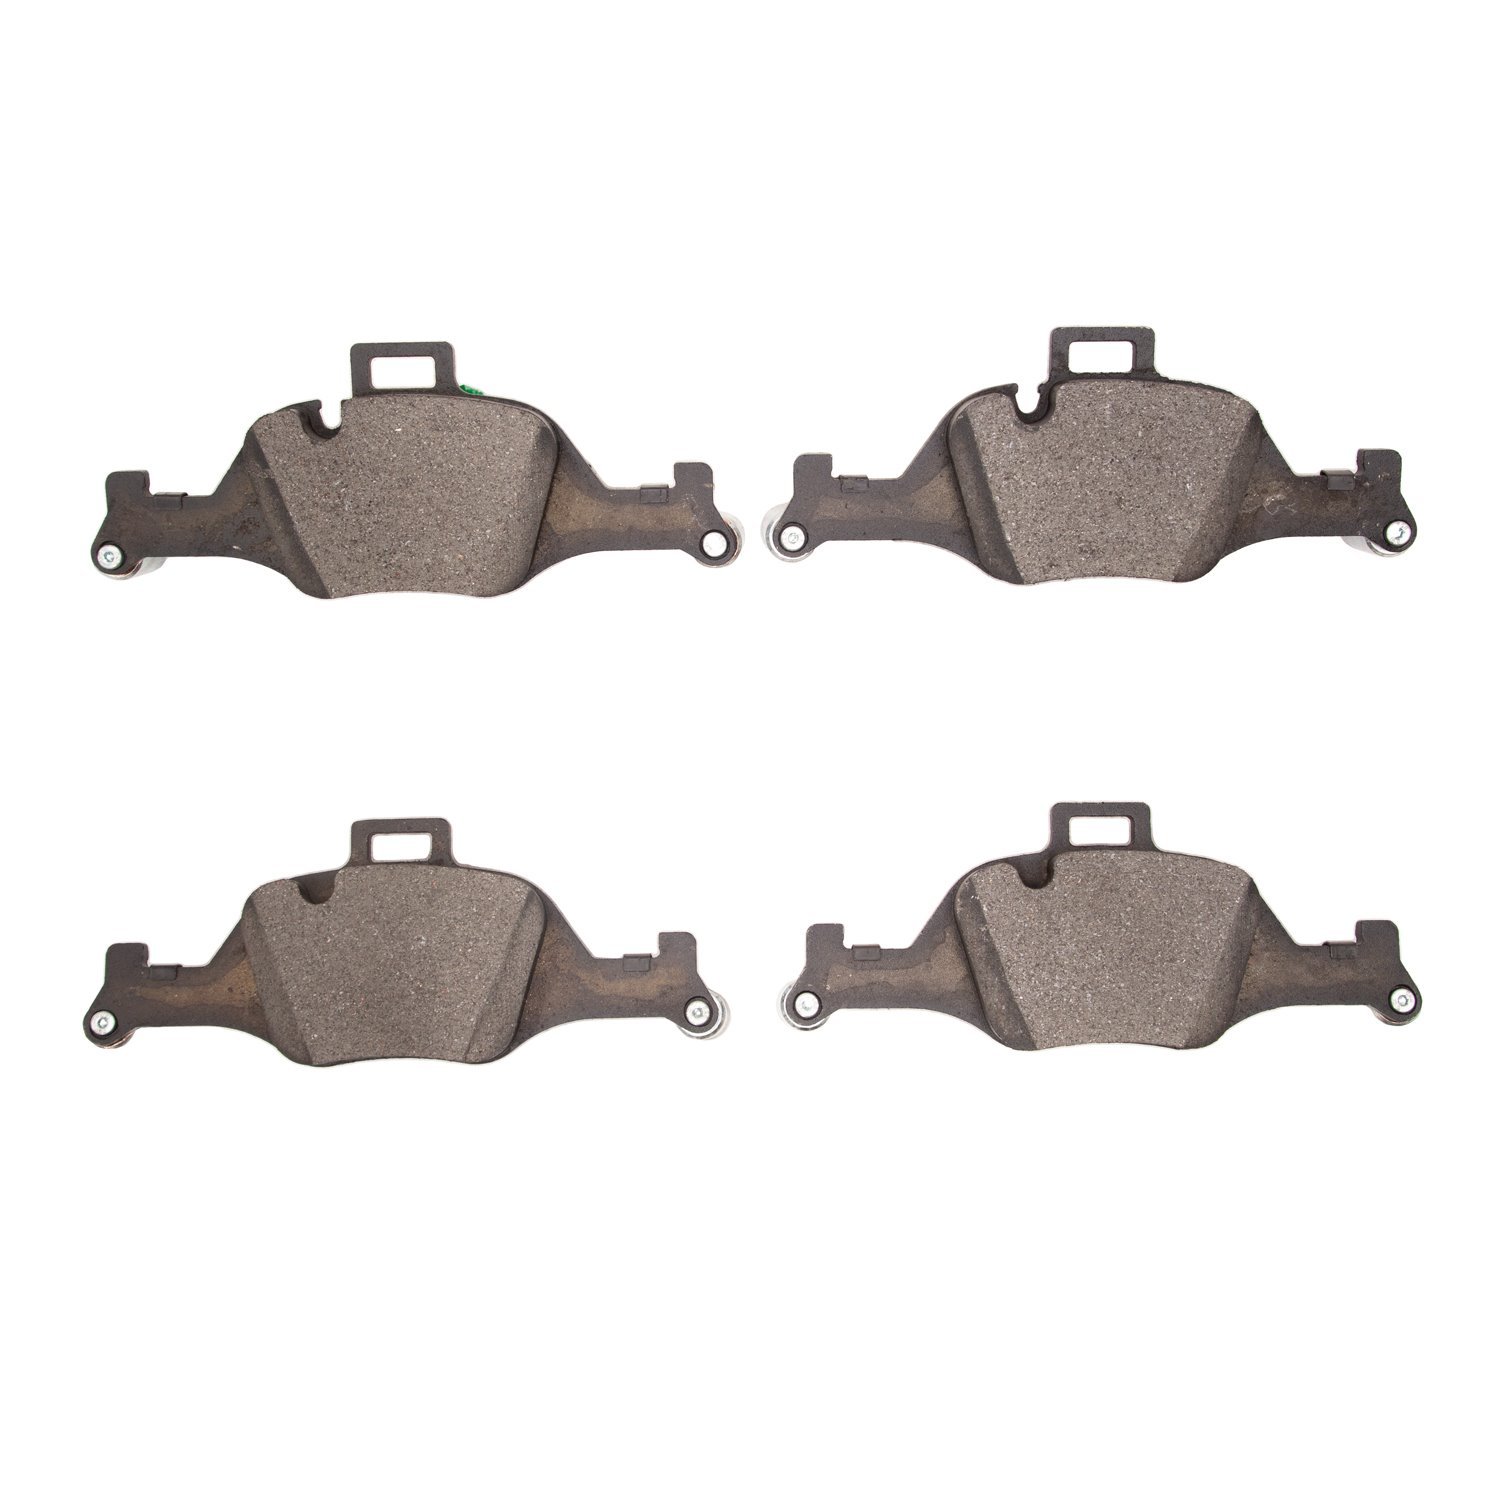 Euro Ceramic Brake Pads, Fits Select BMW, Position: Front